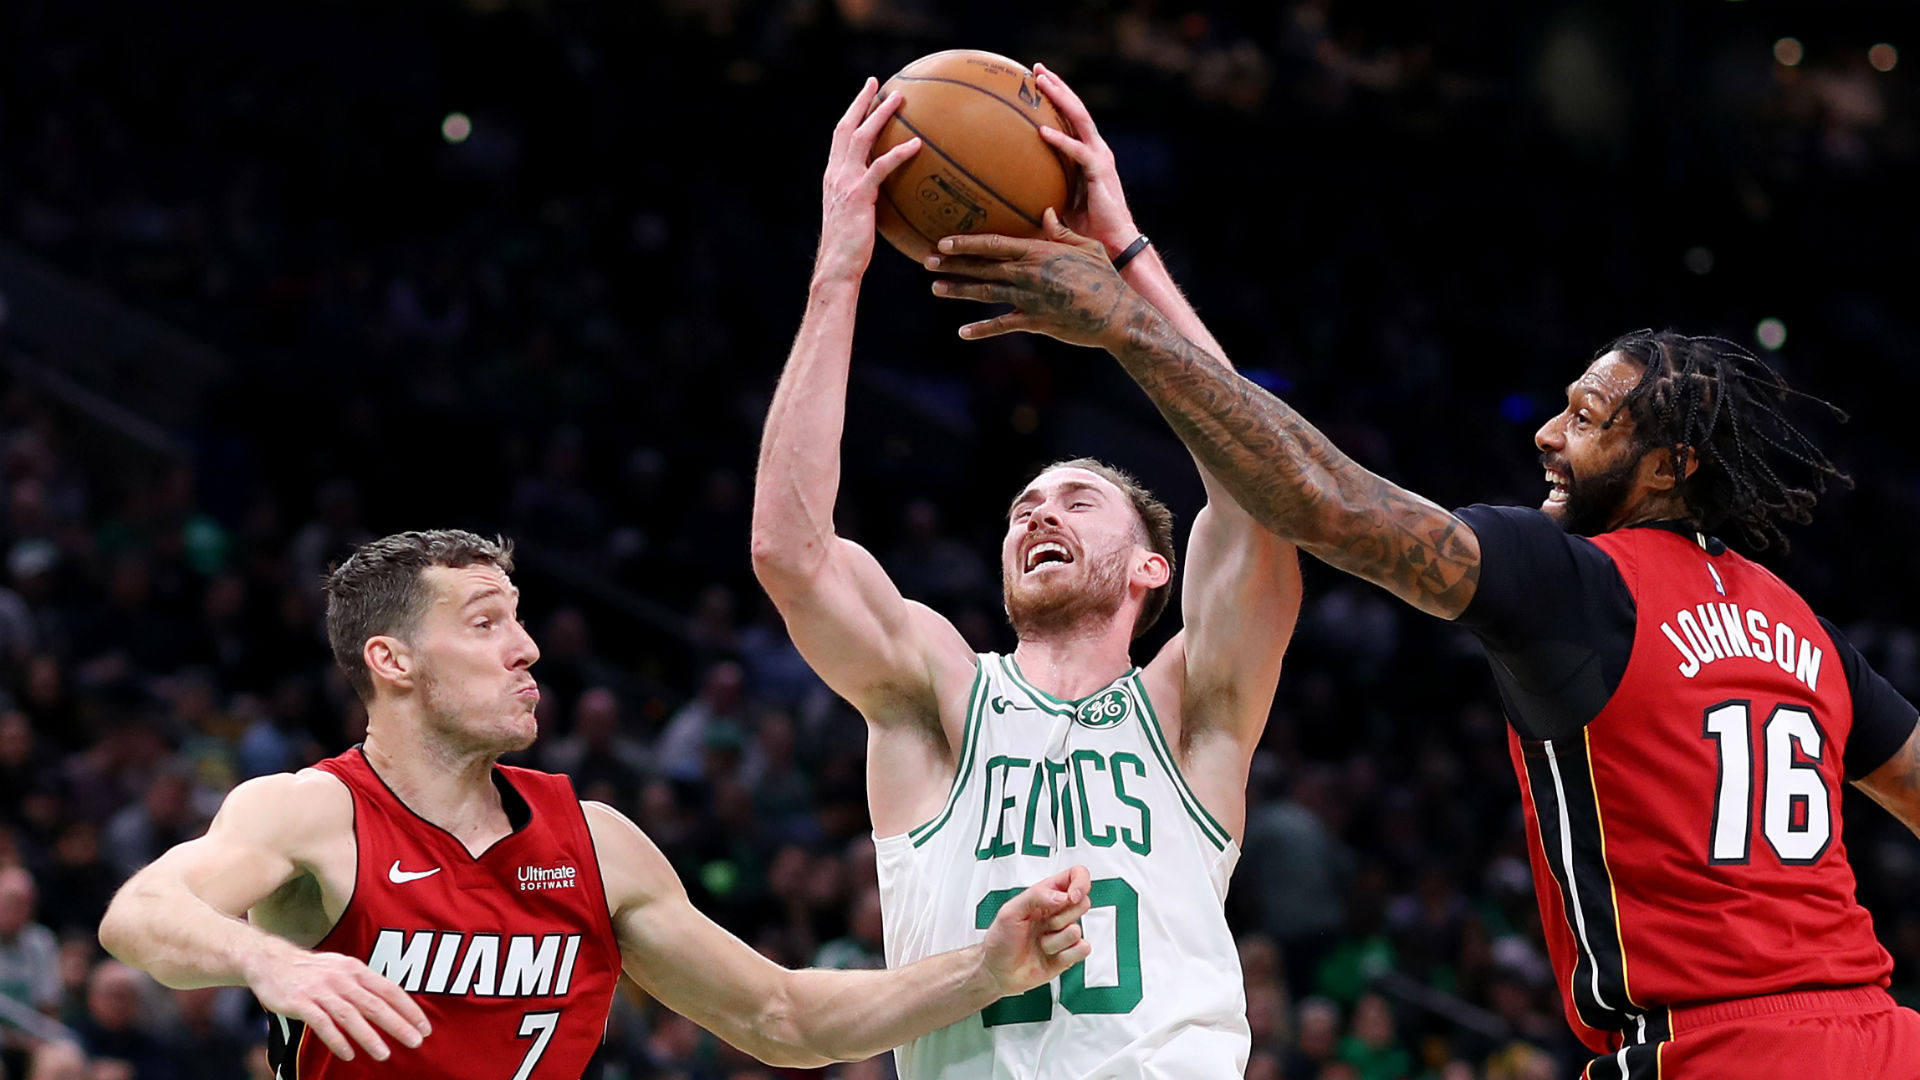 Gordon Hayward had 25 points against the Miami Heat, earning plaudits from Kyrie Irving and Al Horford.